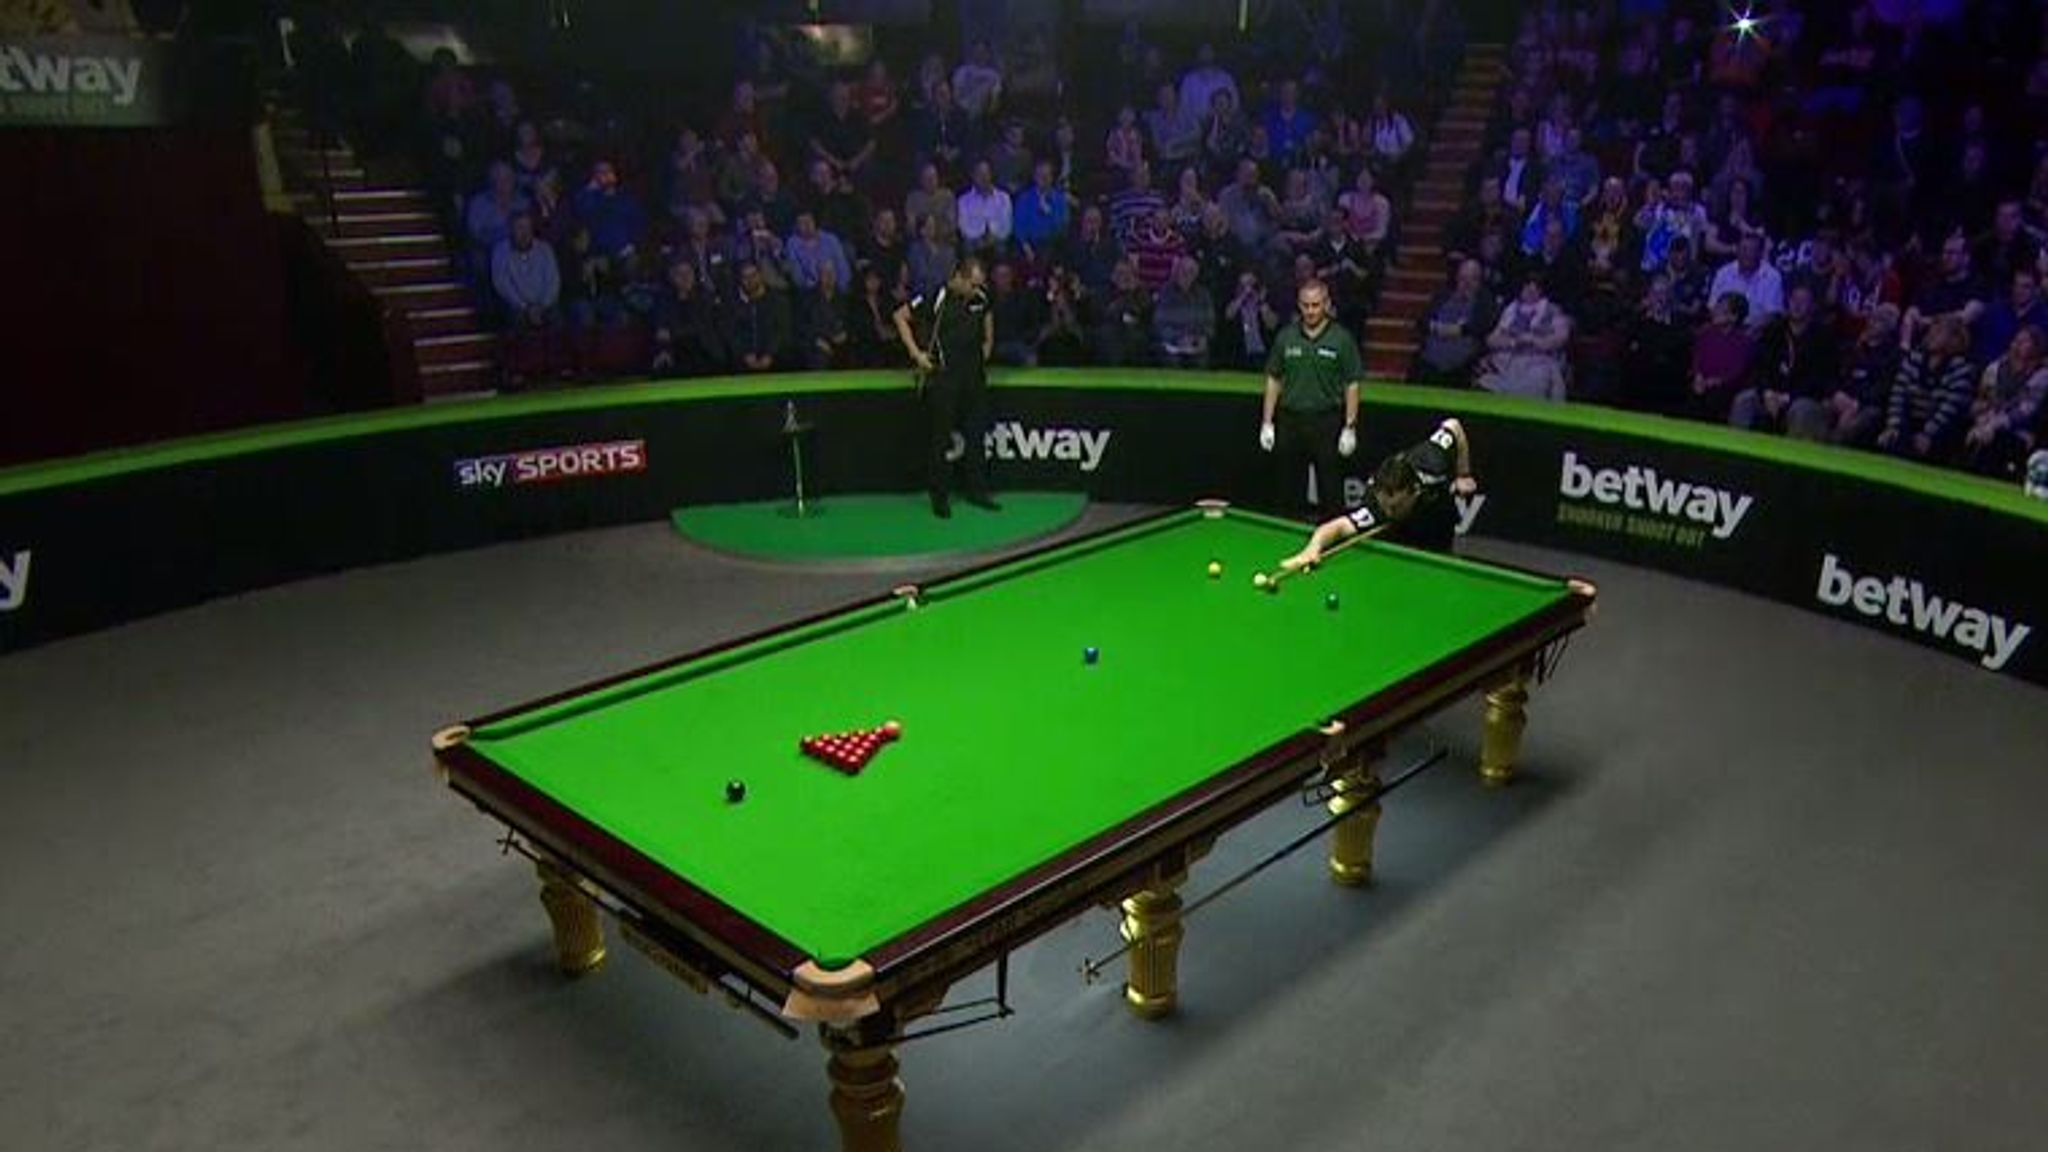 Snooker Shoot Out results wins for Jimmy White, Judd Trump and Graeme Dott Snooker News Sky Sports